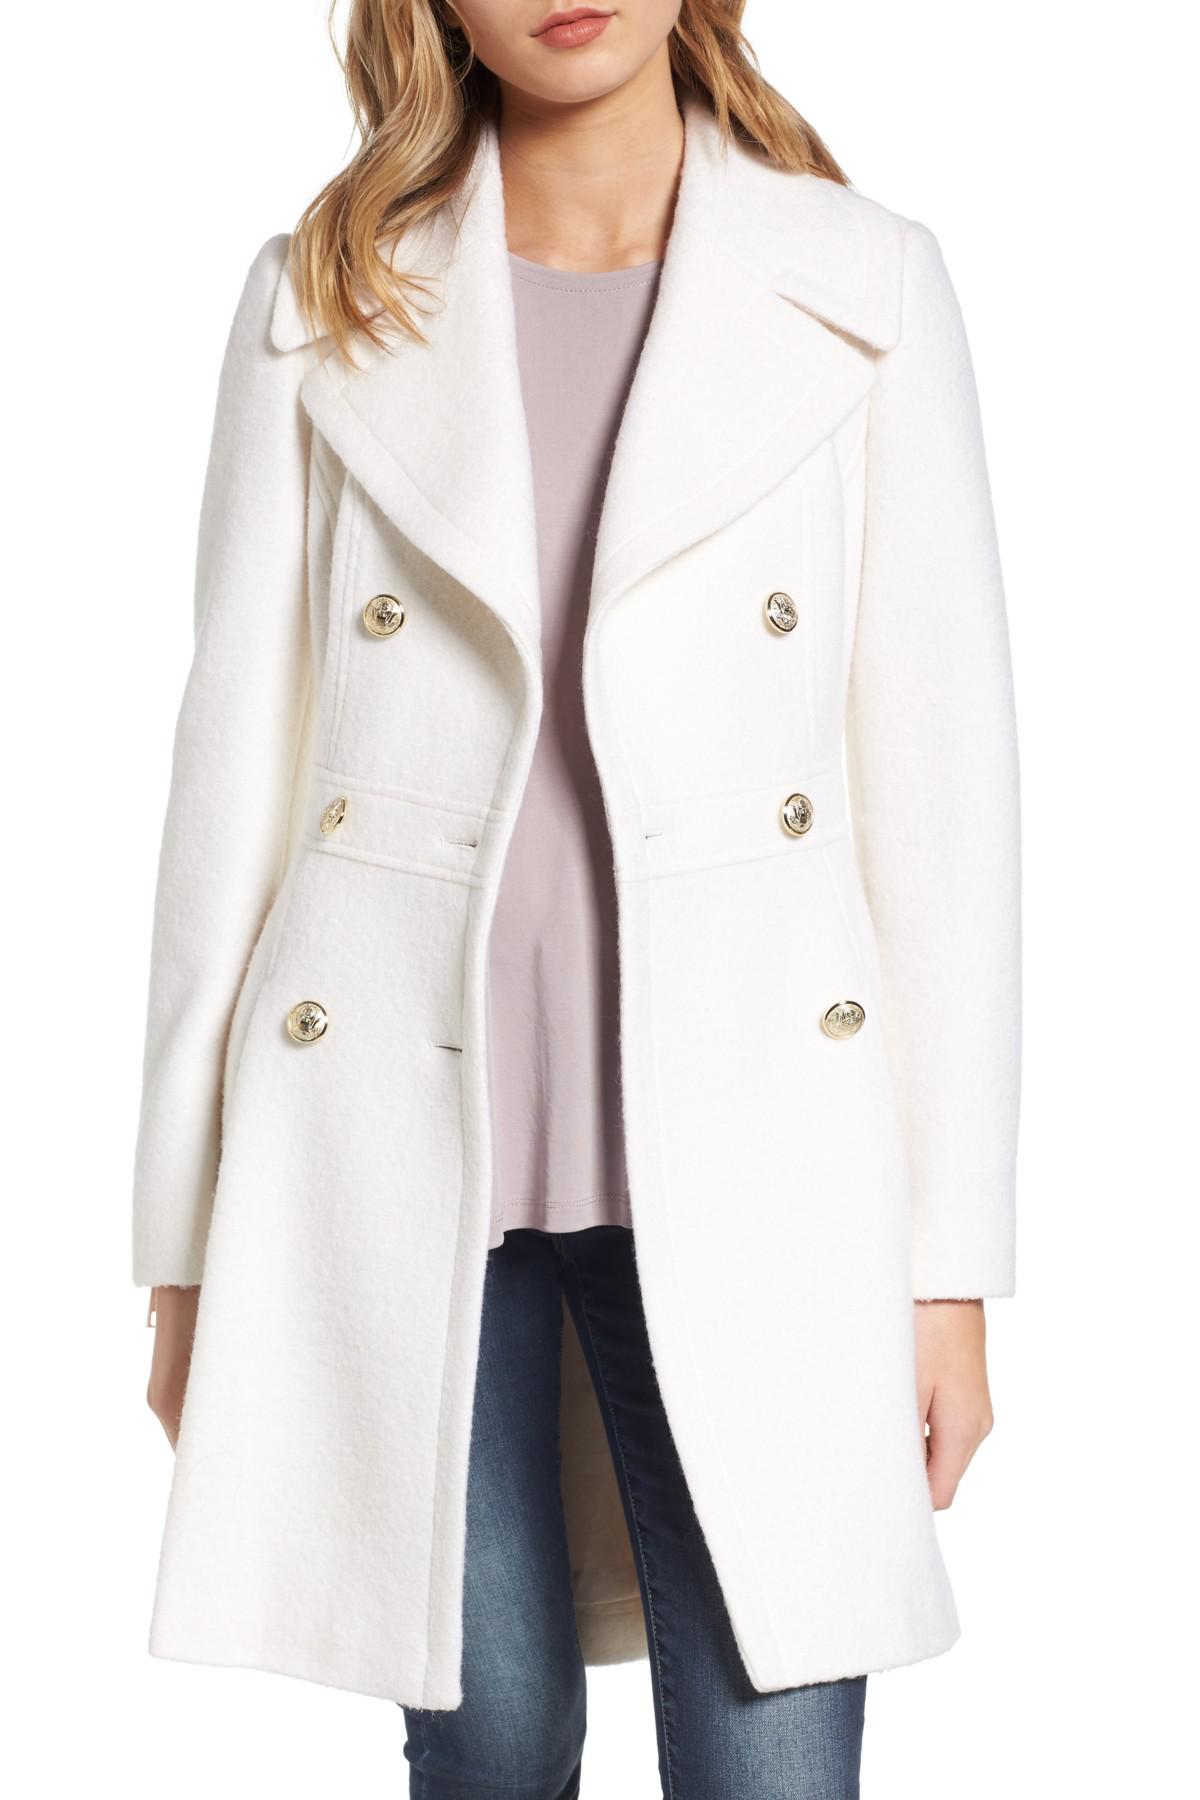 Guess Double Breasted Wool Blend Coat in White | Lyst